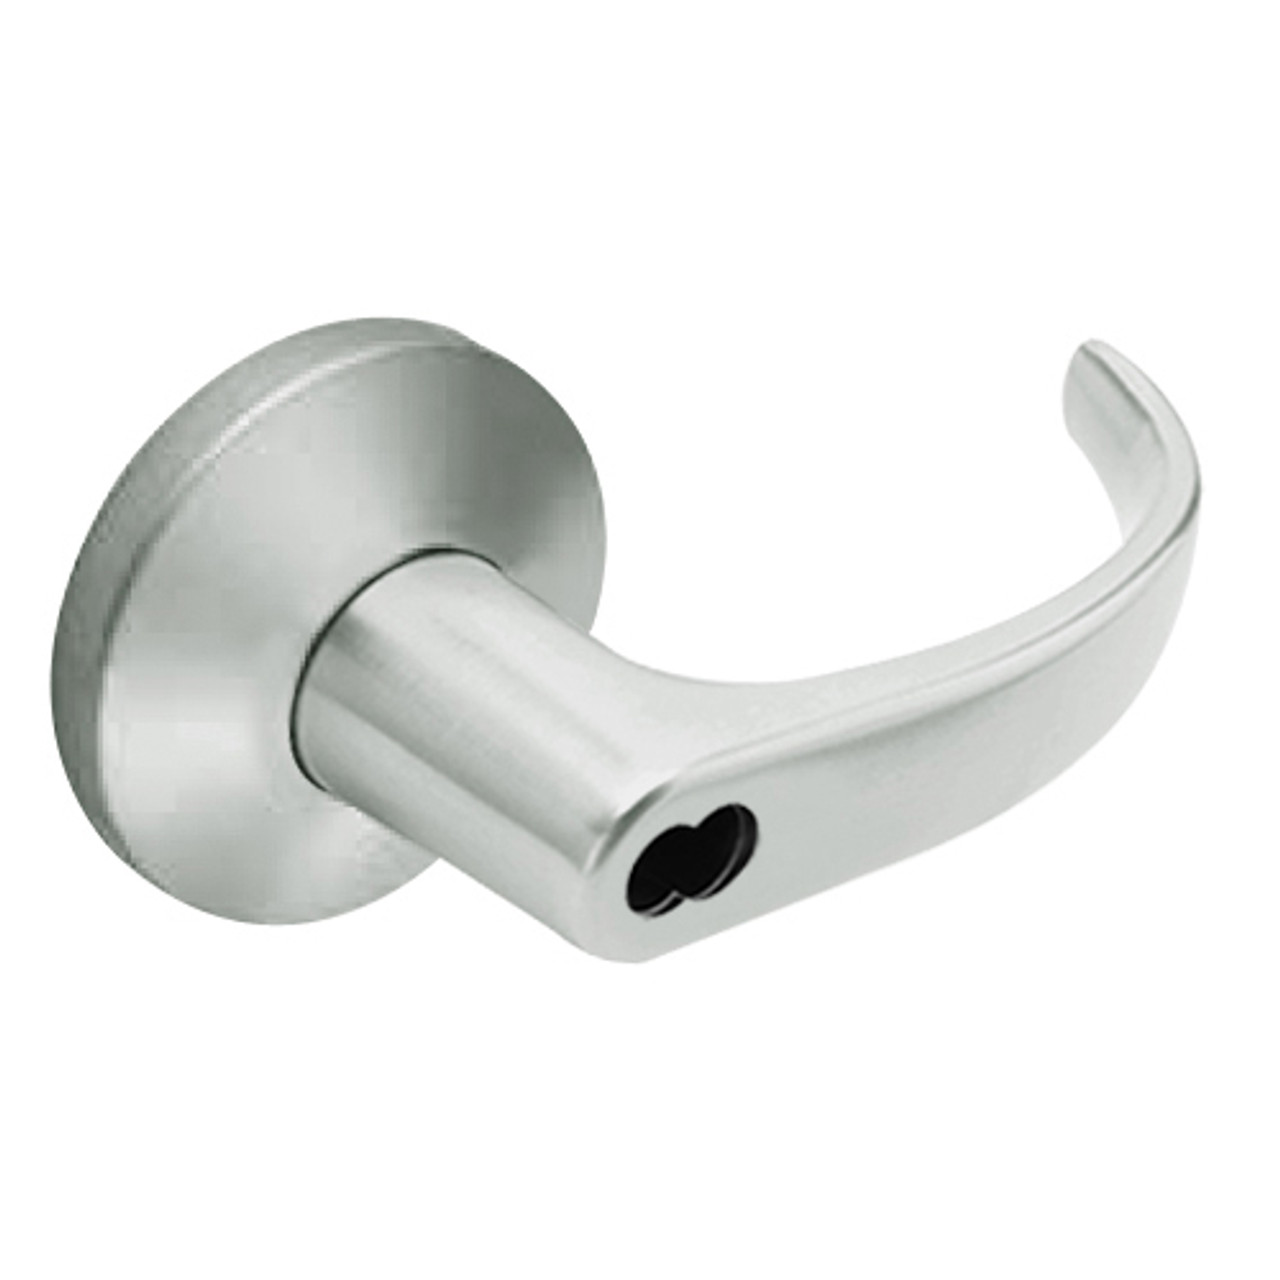 9K47EA14KSTK619 Best 9K Series Entrance or Office Cylindrical Lever Locks with Curved with Return Lever Design Accept 7 Pin Best Core in Satin Nickel